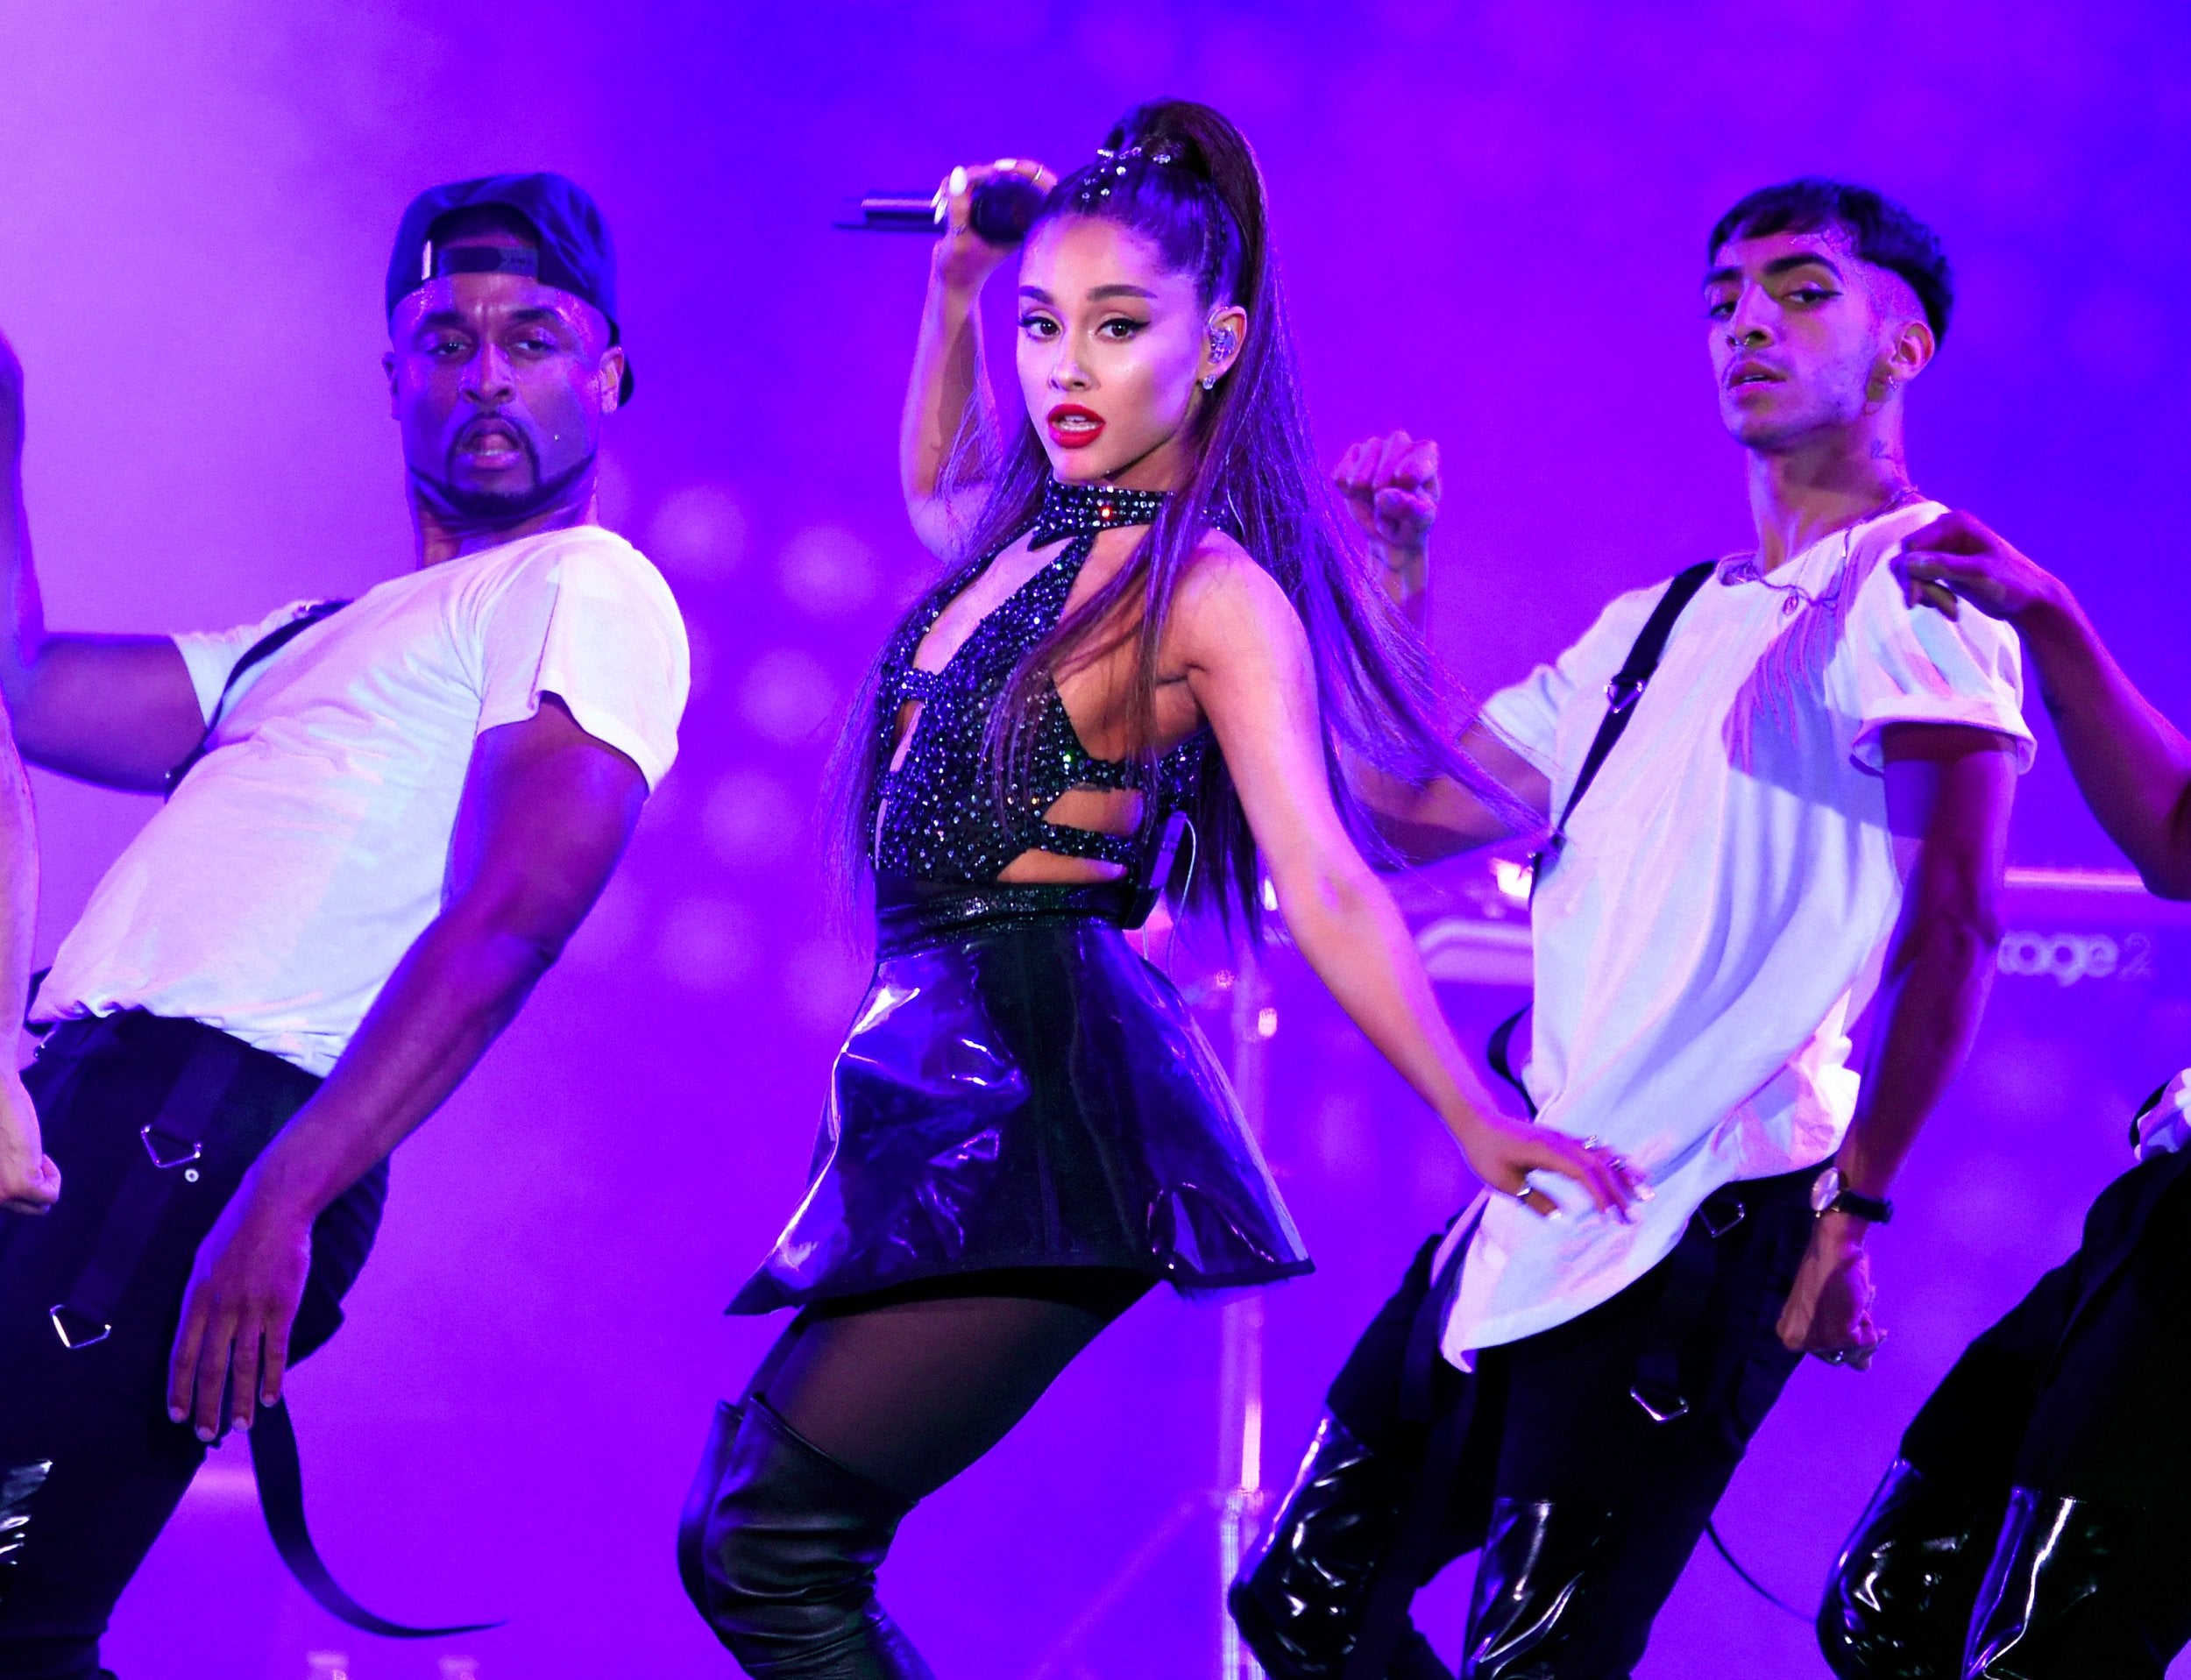 Ariana Grande was the most-streamed female artist of 2018 on Spotify